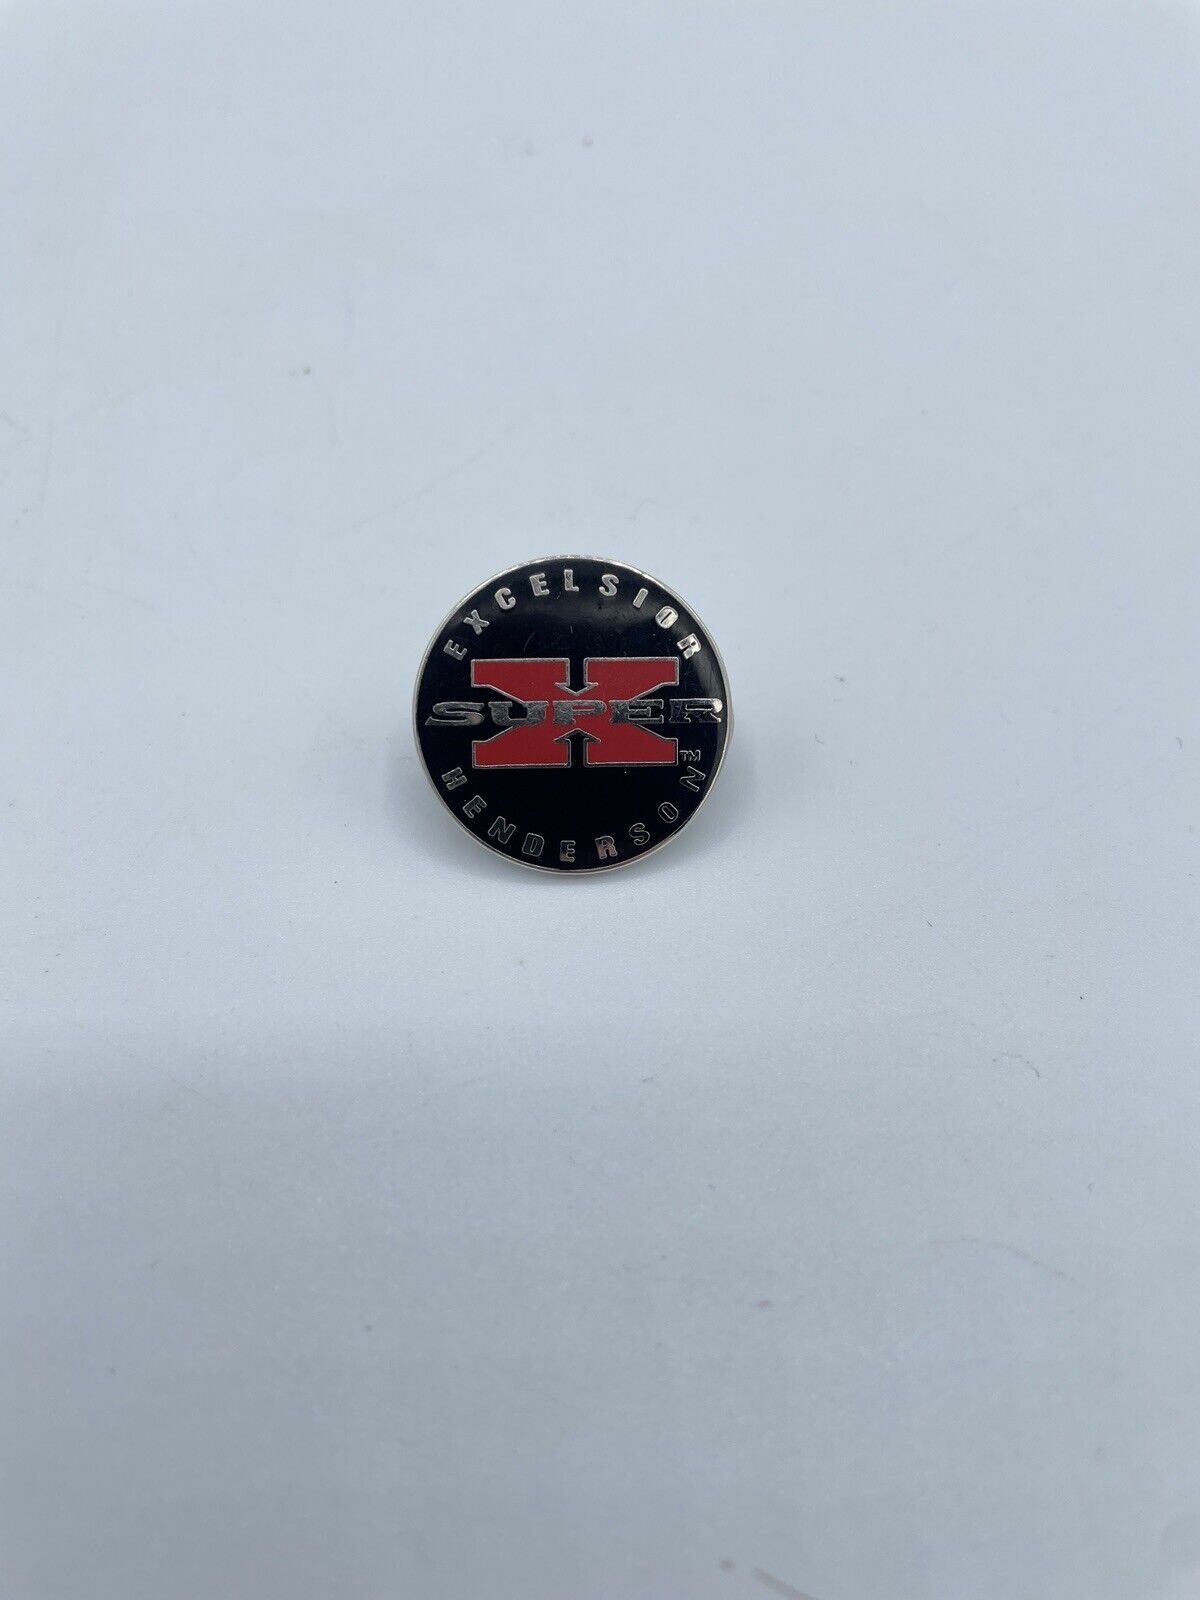 Excelsior Super X Henderson Lapel Pin Black & Red